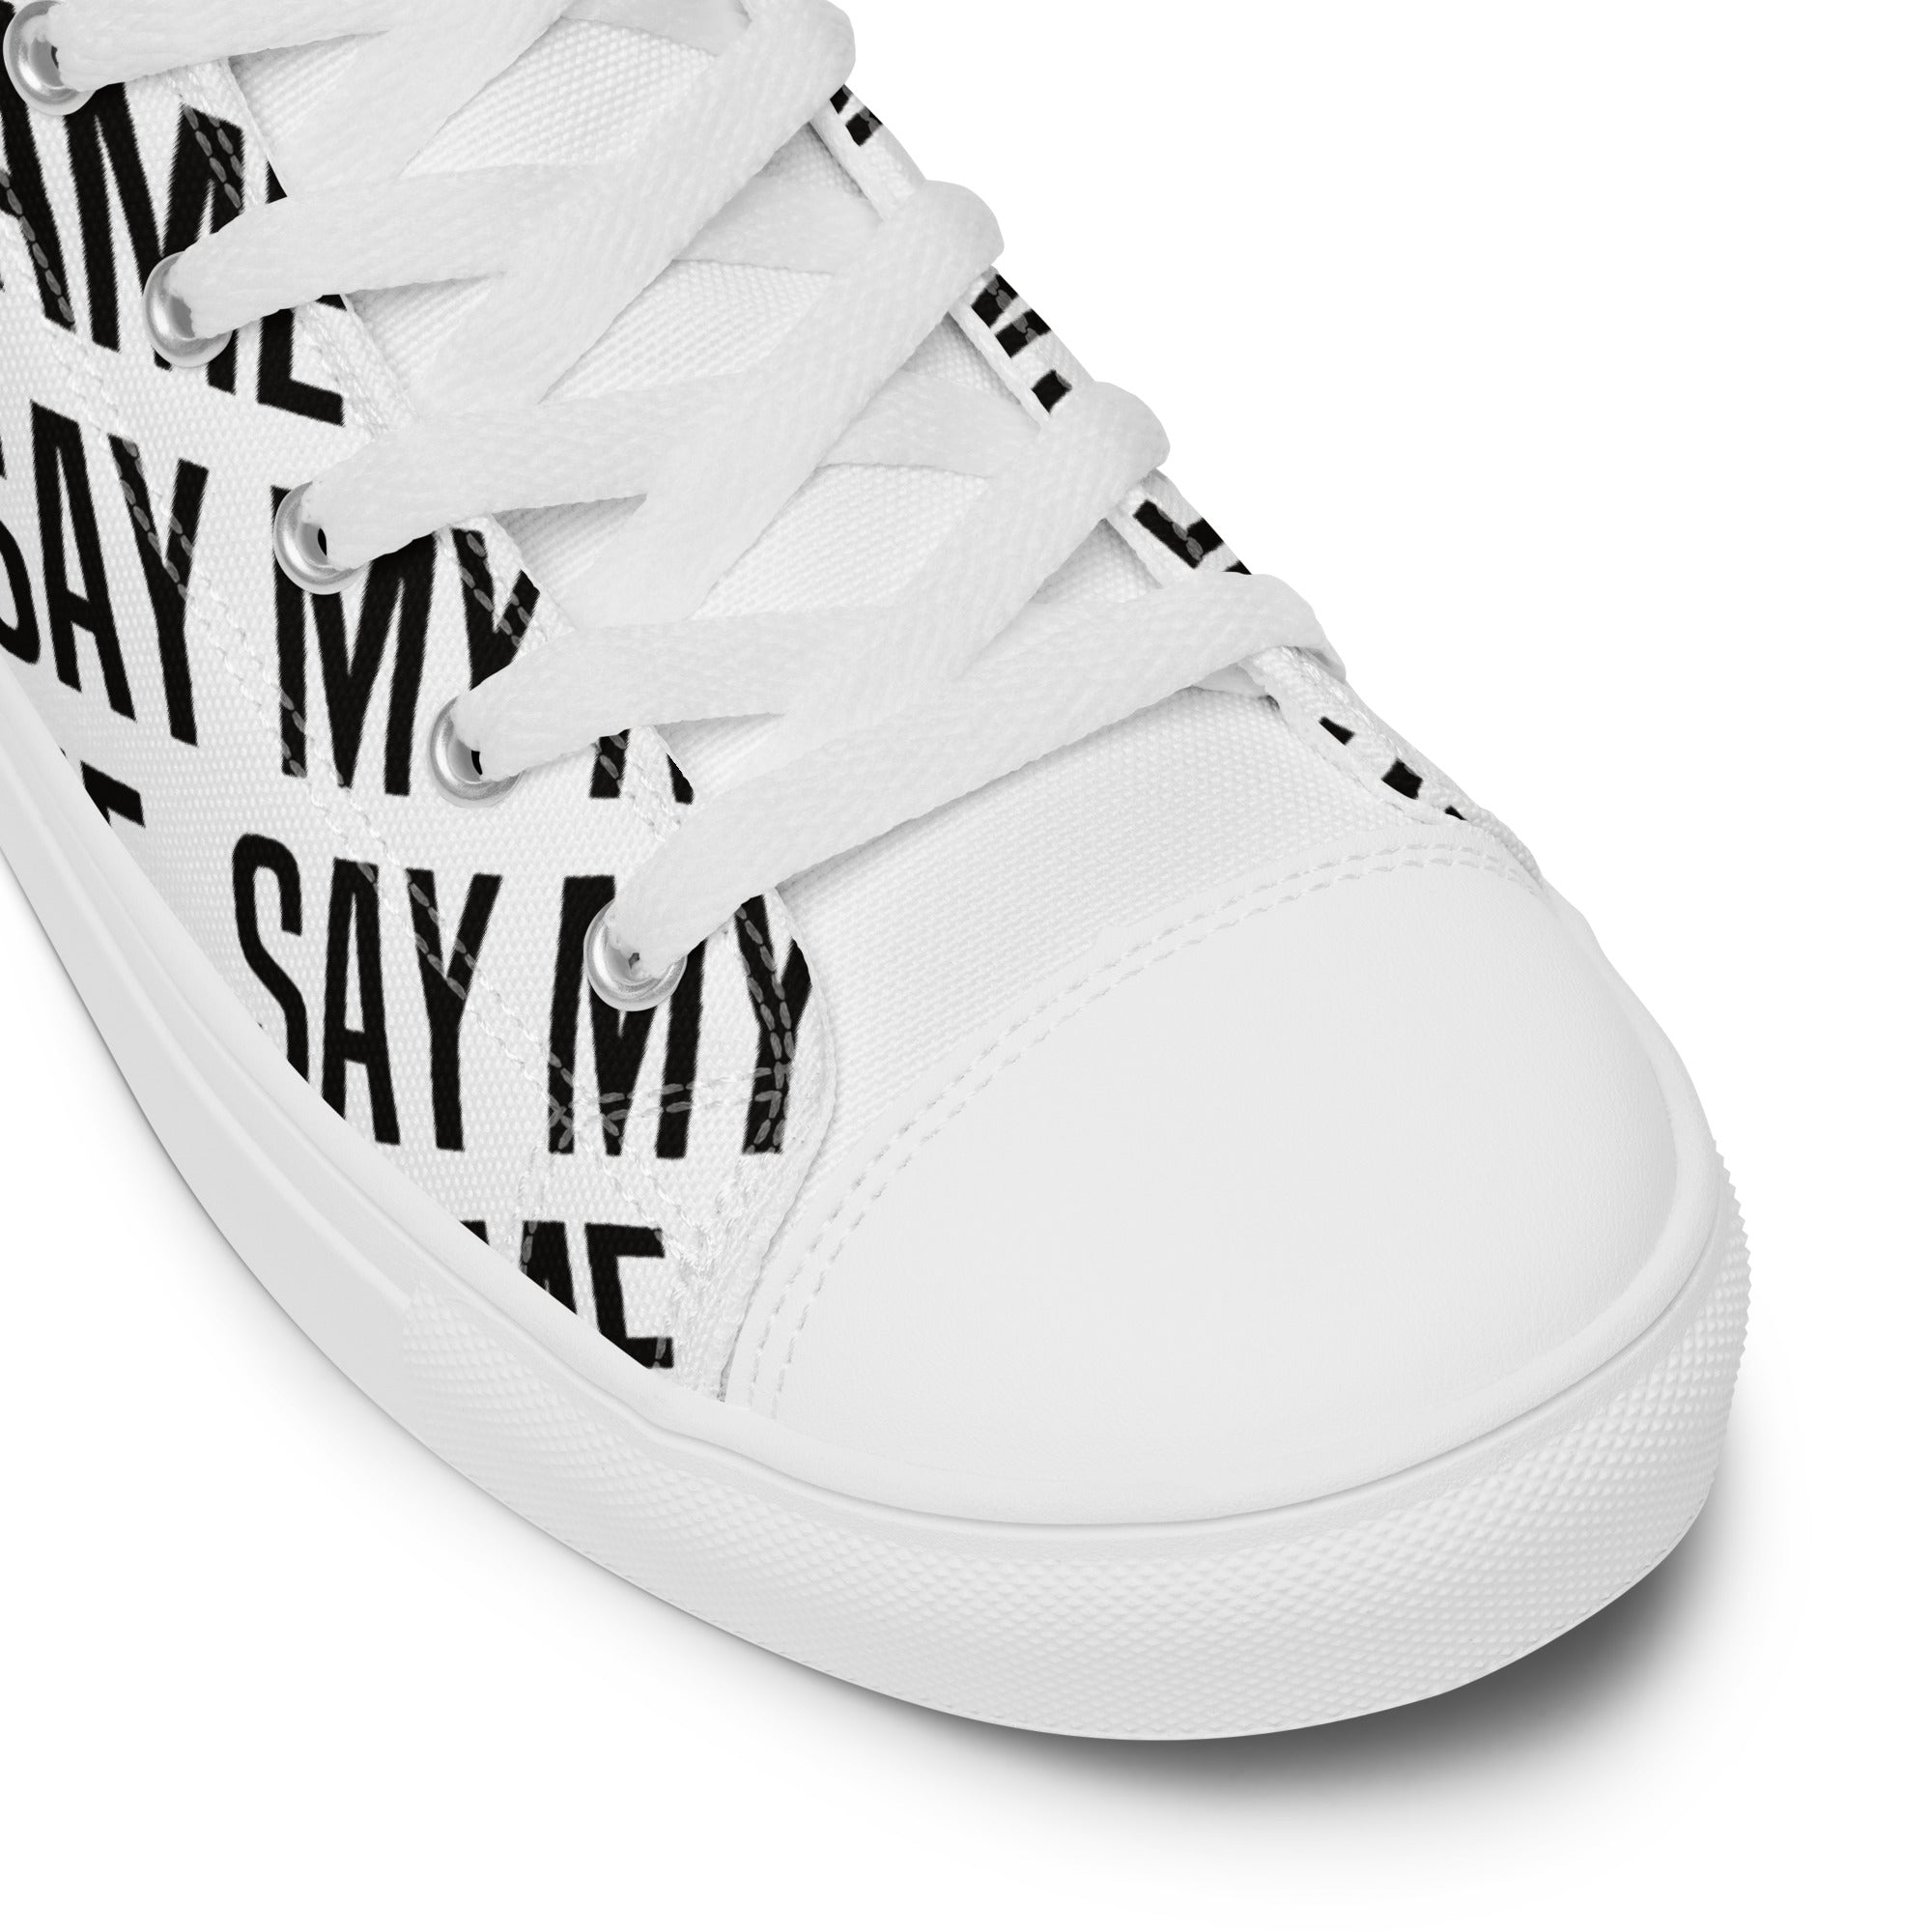 Baskets hautes blanches en toile  homme "SAY MY NAME" Multi